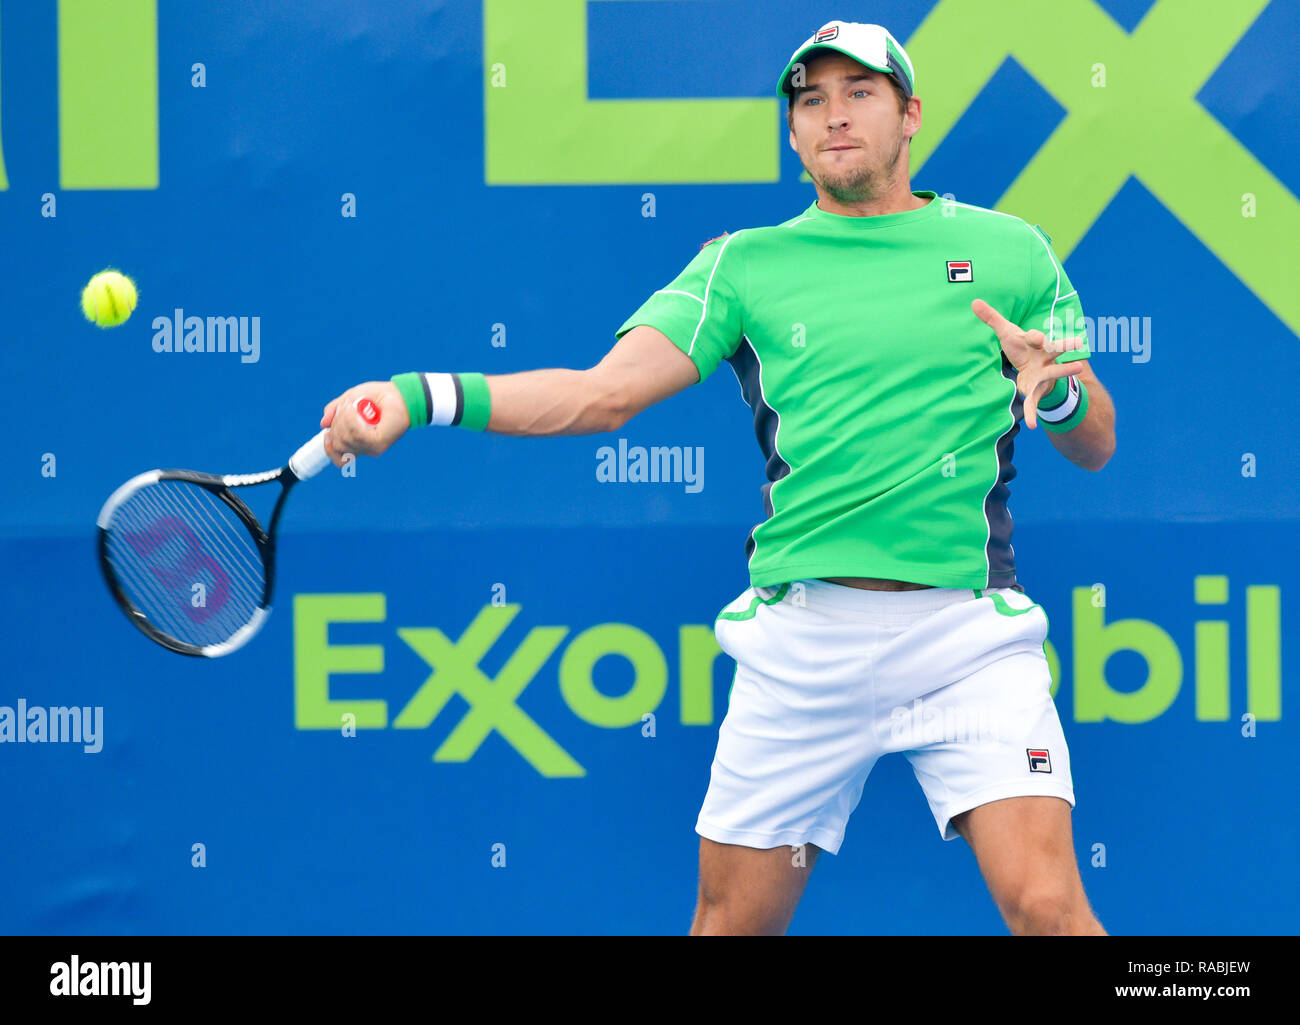 Doha, Qatar. 2nd Jan, 2019. Dusan Lajovic of Serbia returns the ball during  the singles second round match against Ricardas Berankis of Lithuania at  the ATP Qatar Open tennis tournament in Doha,